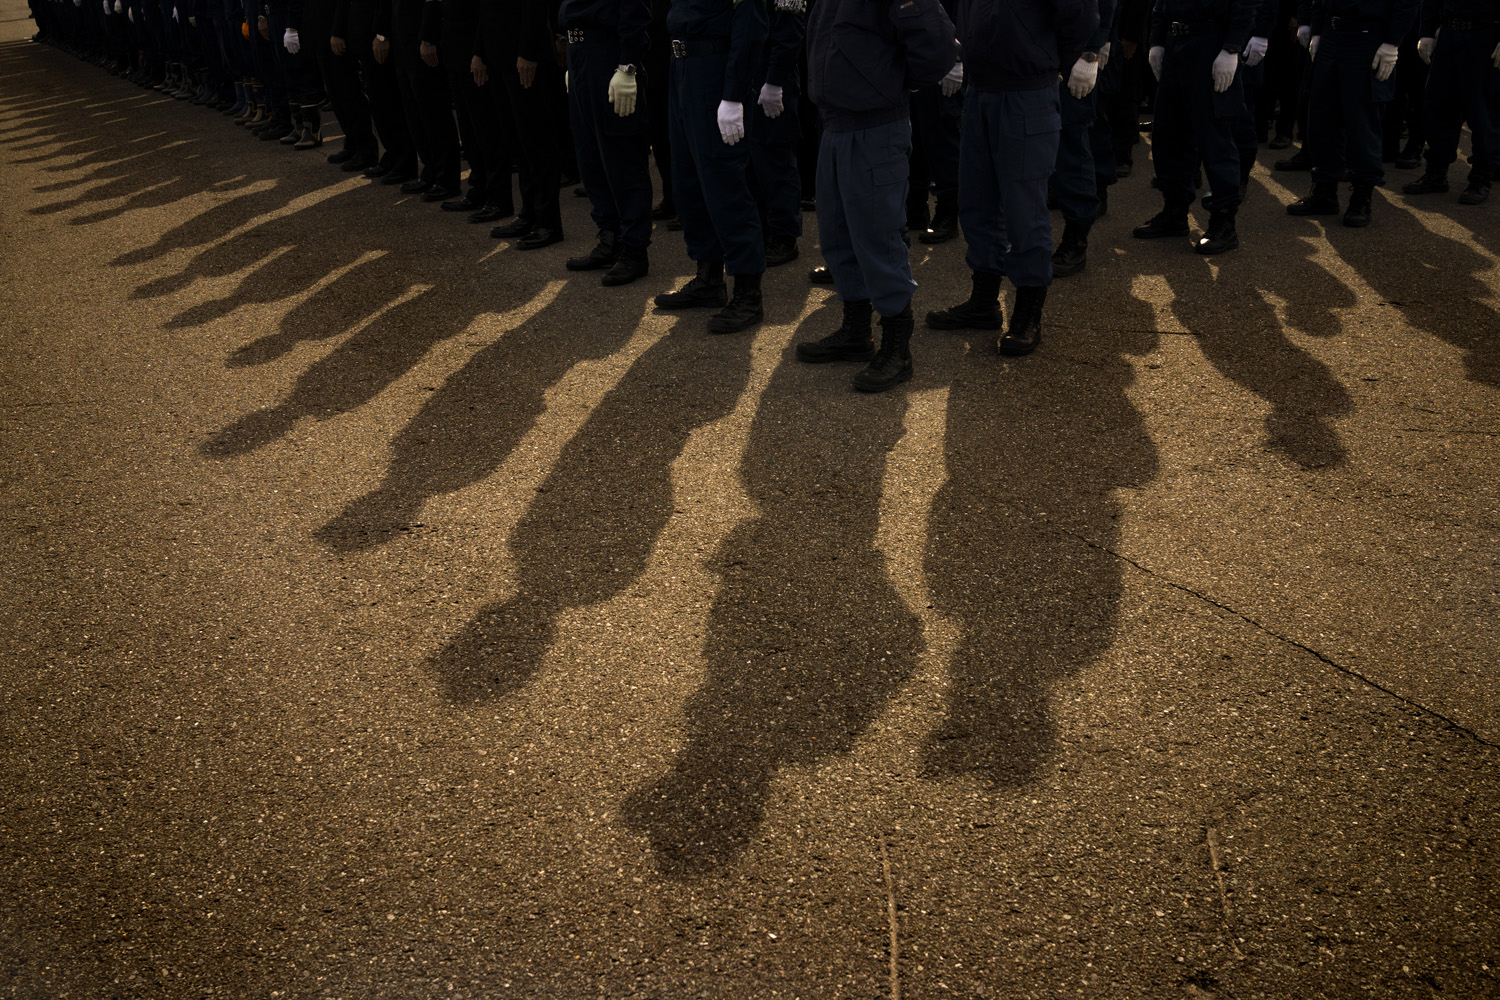 Japan, Namie, 2014Police officers stand in formation after looking for bodies inside the nuclear zone around the crippled Daiichi Nuclear Plant the day before the third anniversary of the earthquake and Tsunami that hit the north east coast of Japan in 2011.